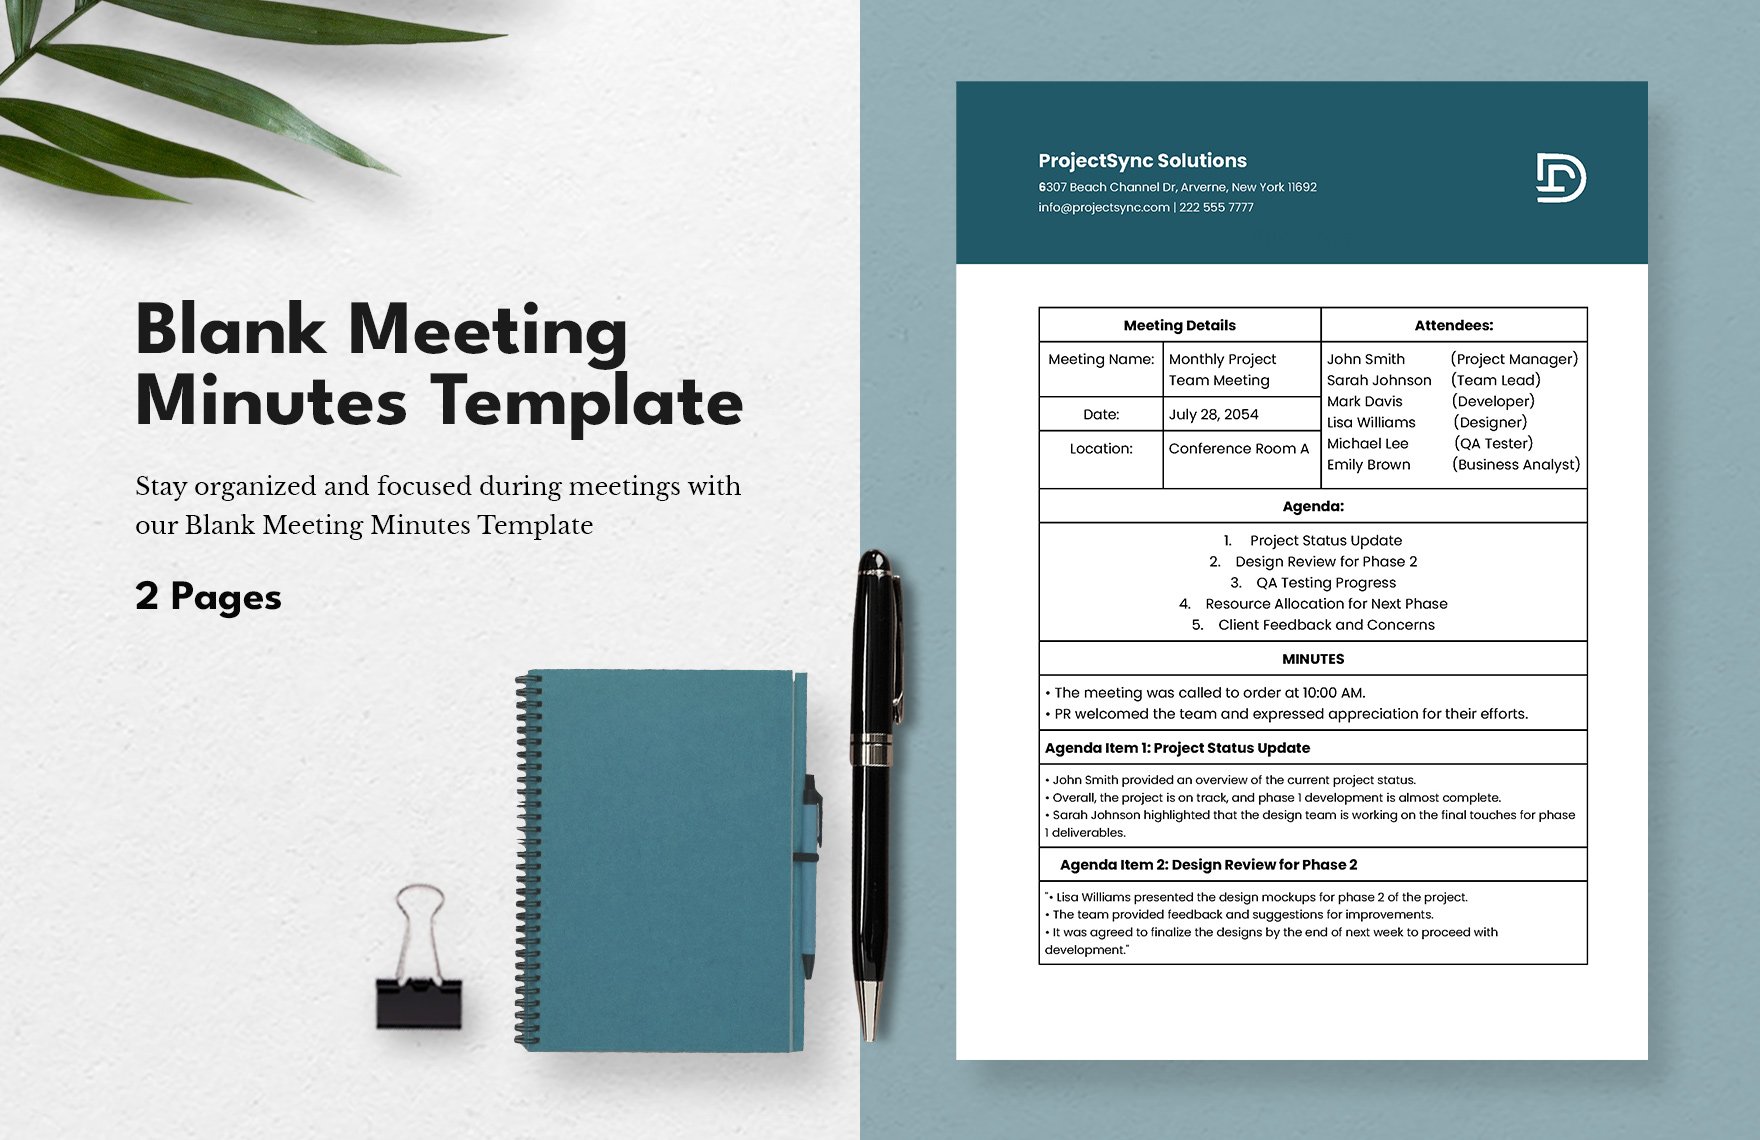 Blank Meeting Minutes Template